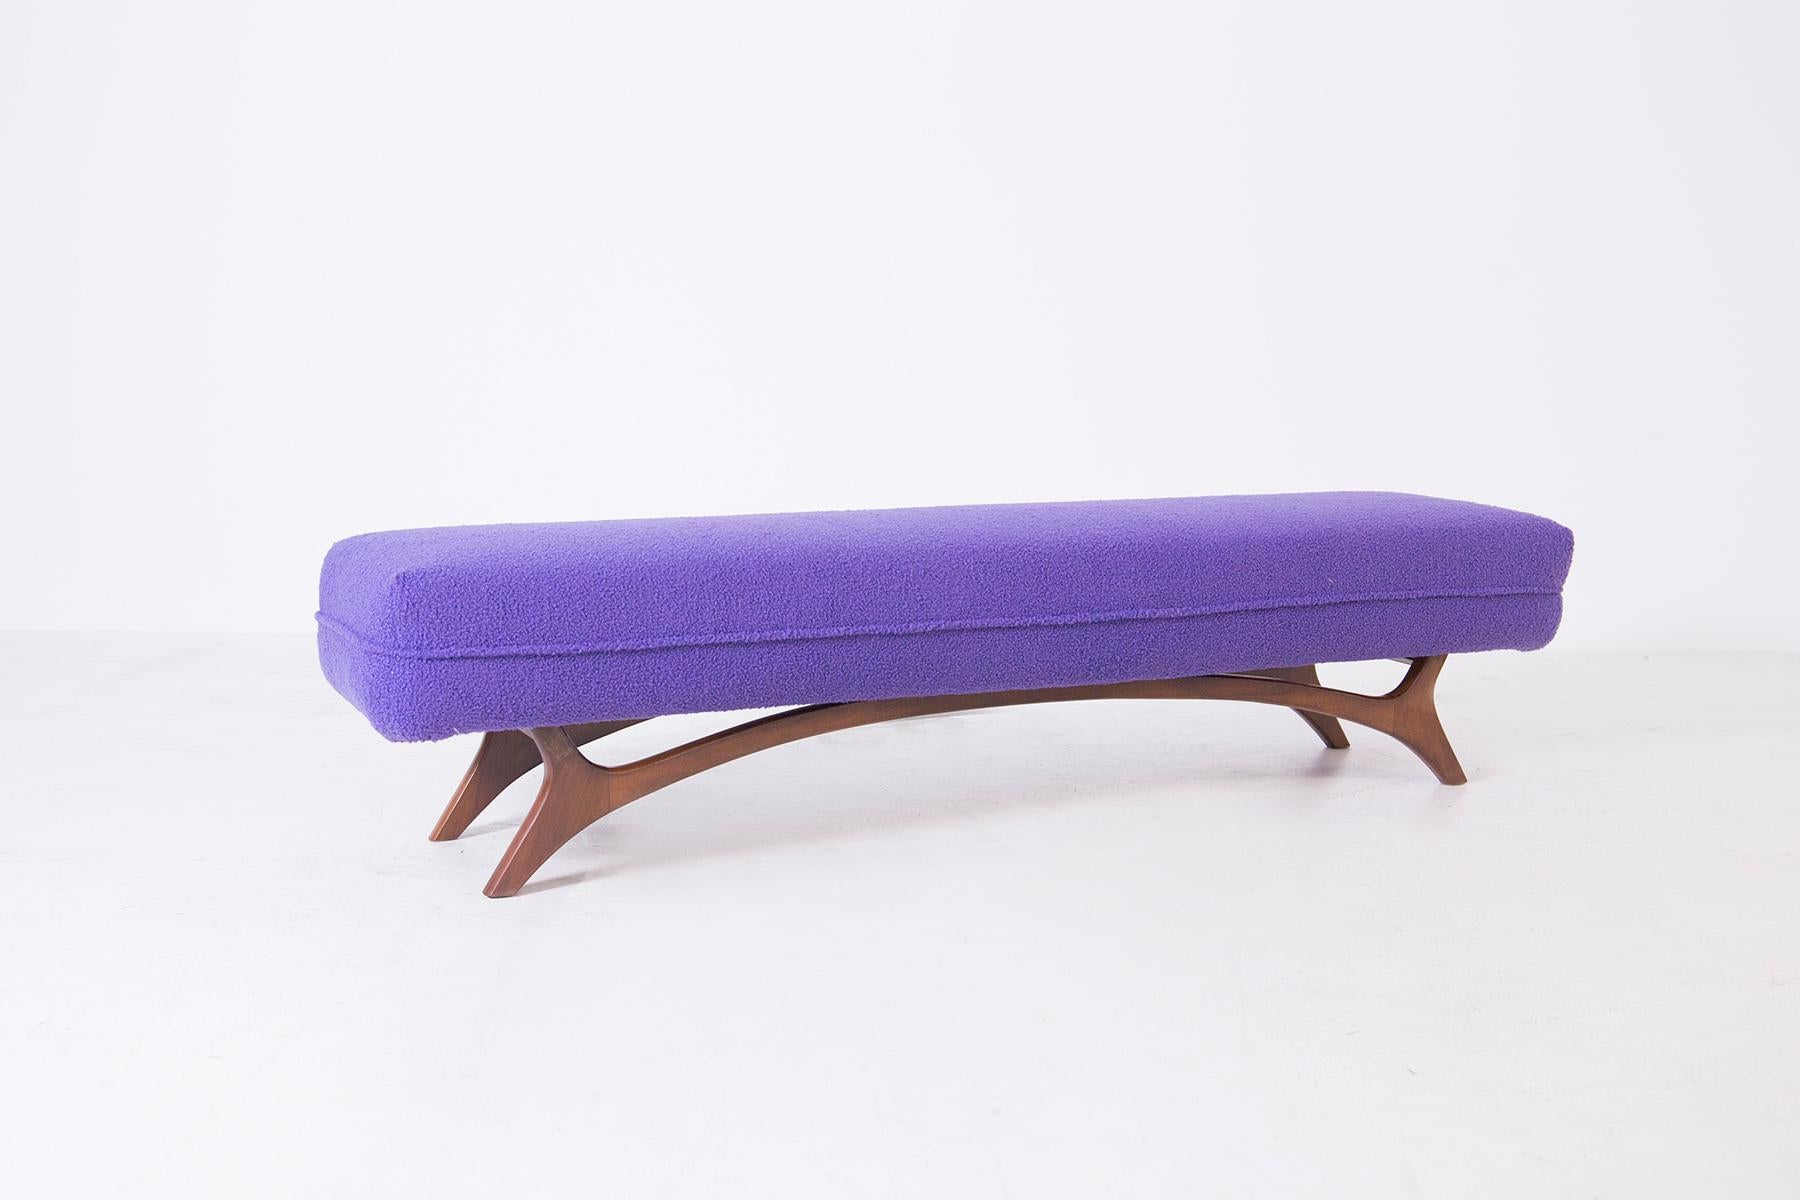 American bench from the 1950s. The bench has been restored and reupholstered in an elegant purple bouclé fabric. The bench has a wooden frame with special attention to its semi-curved feet that align with the frame.
The special feature of the bench